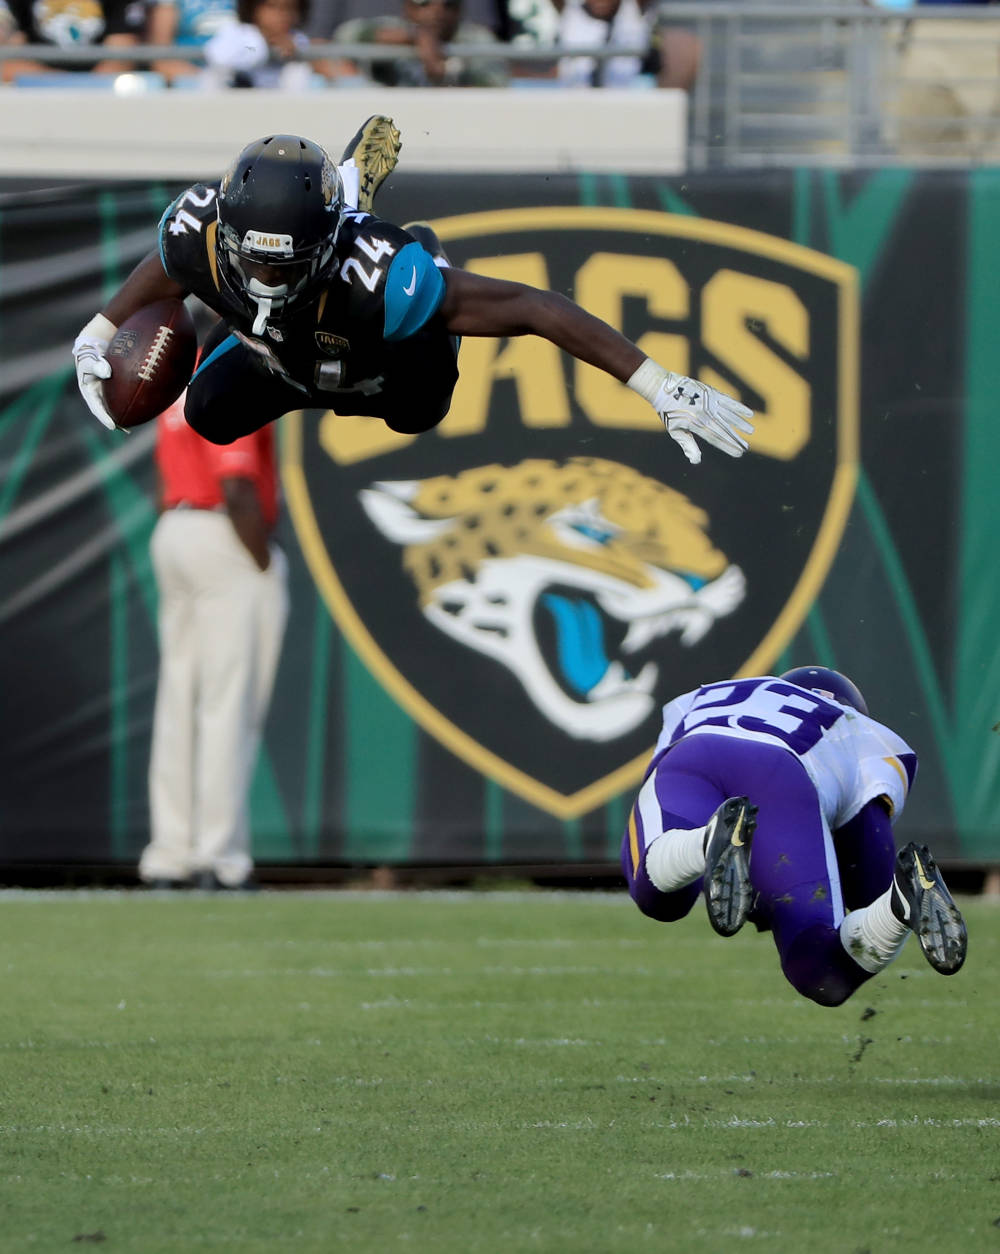 JACKSONVILLE, FL - DECEMBER 11:   T.J. Yeldon #24 of the Jacksonville Jaguars gets airborne on a tackle by Terence Newman #23 of the Minnesota Vikings during the game at EverBank Field on December 11, 2016 in Jacksonville, Florida.  (Photo by Sam Greenwood/Getty Images)